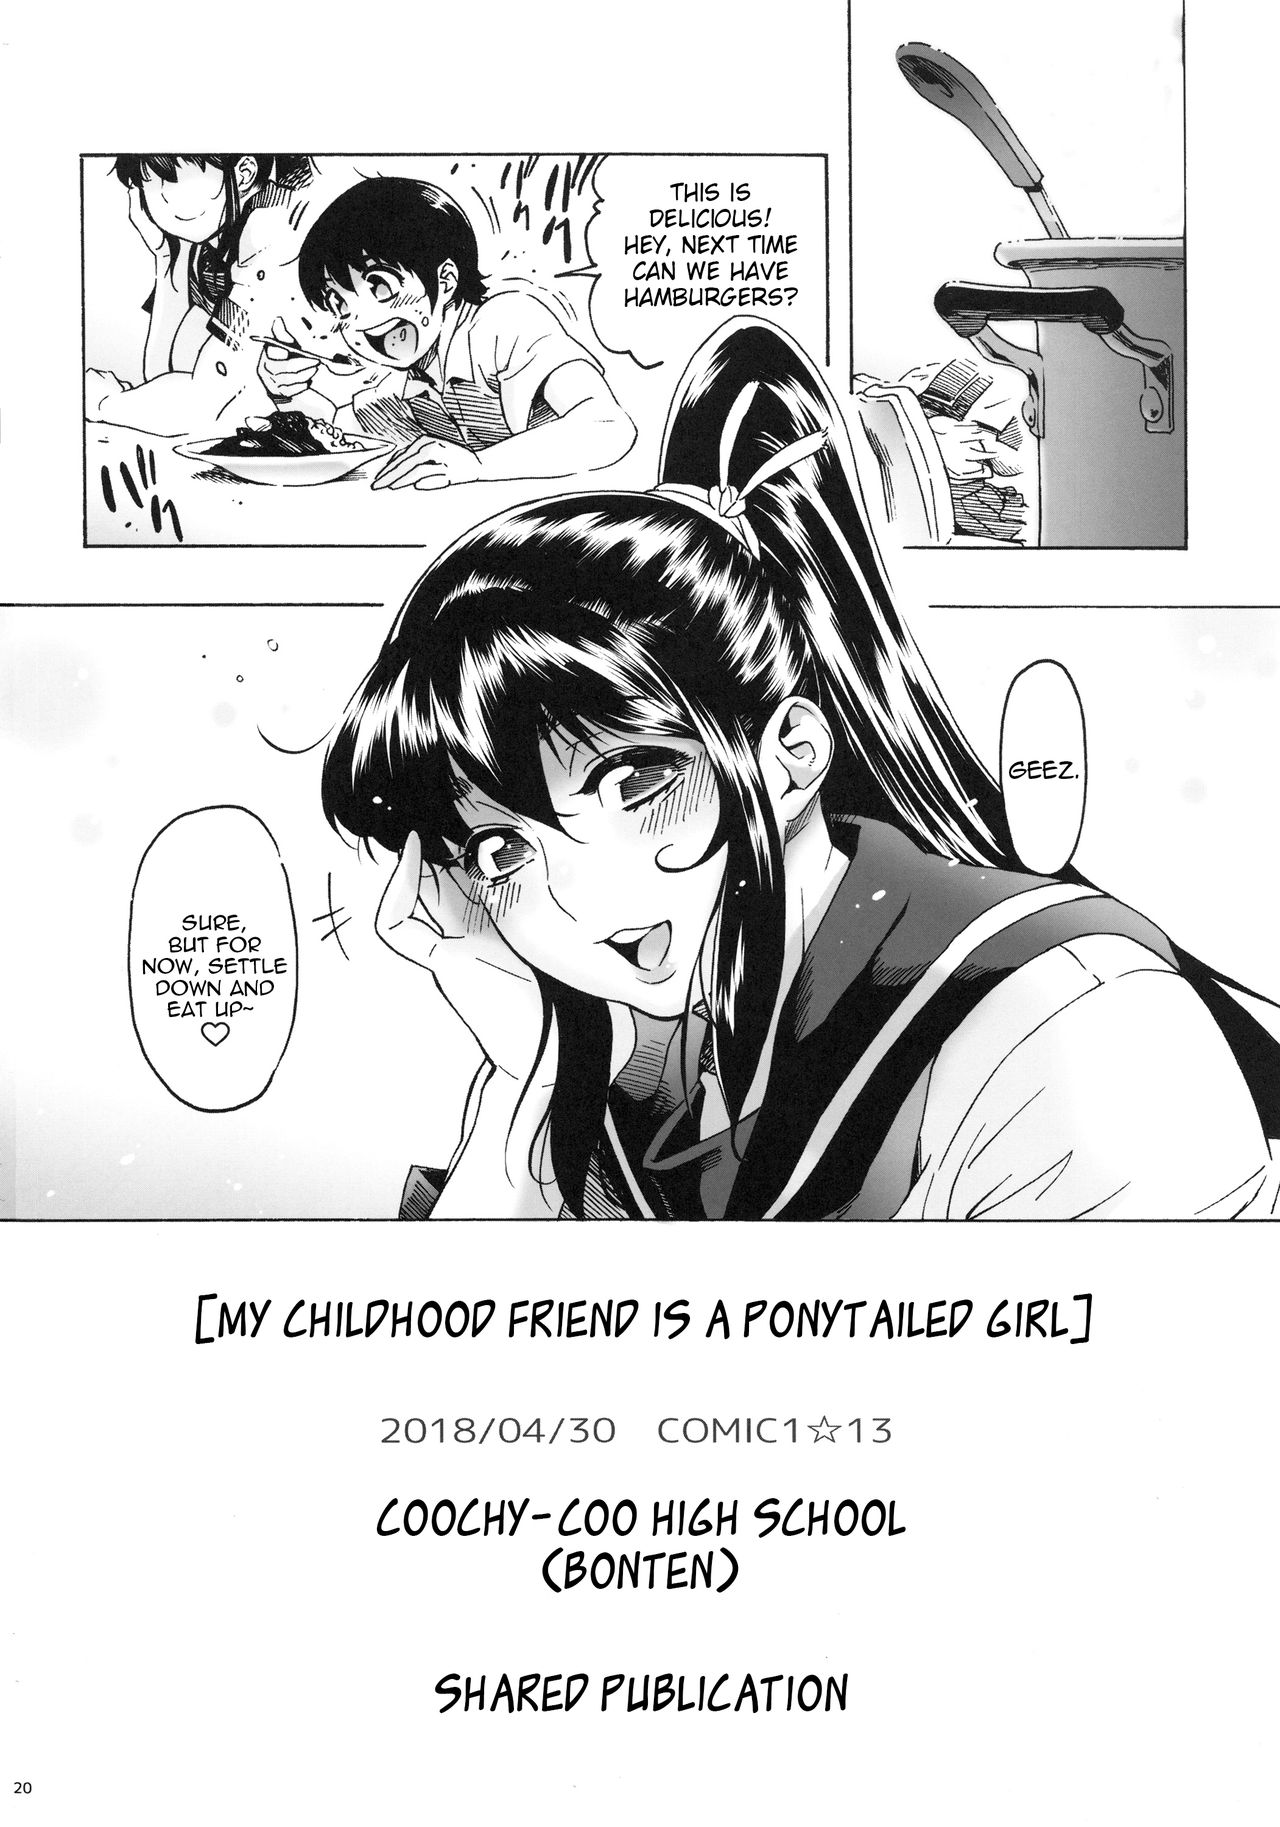 [Coochy-Coo (Bonten)] My Childhood friend is a JK Ponytailed Girl | With Aki-Nee 2 | AkiAss 3 | Trilogy [English] {Stopittarpit} page 21 full